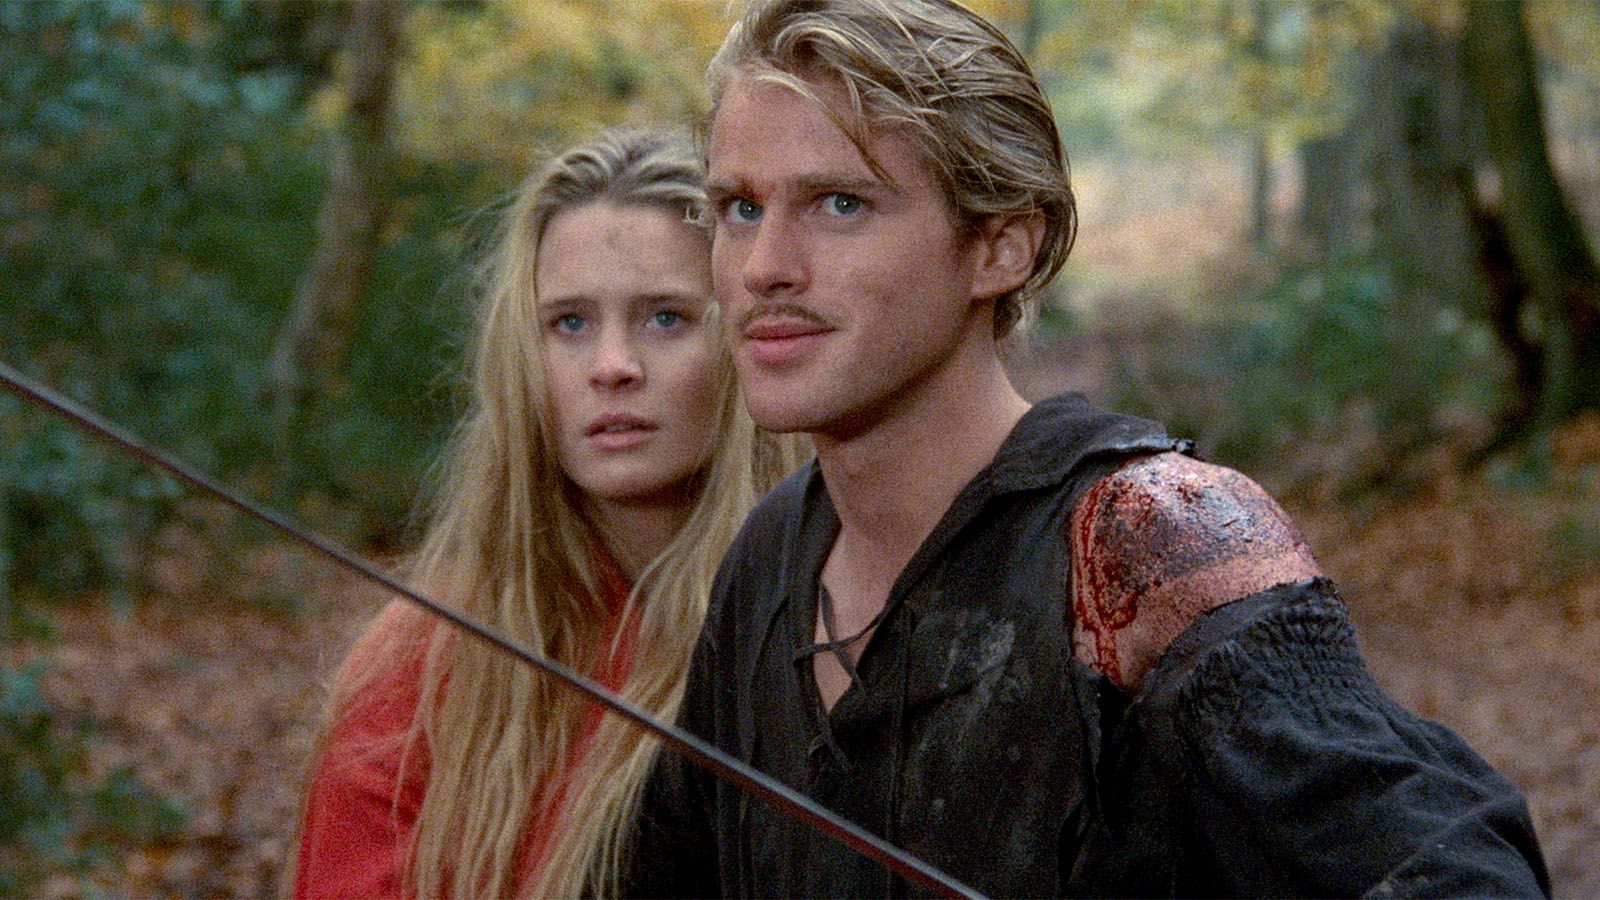 Cary Elwes, star of "The Princess Bride" will be at The Embassy on Friday, July 29.